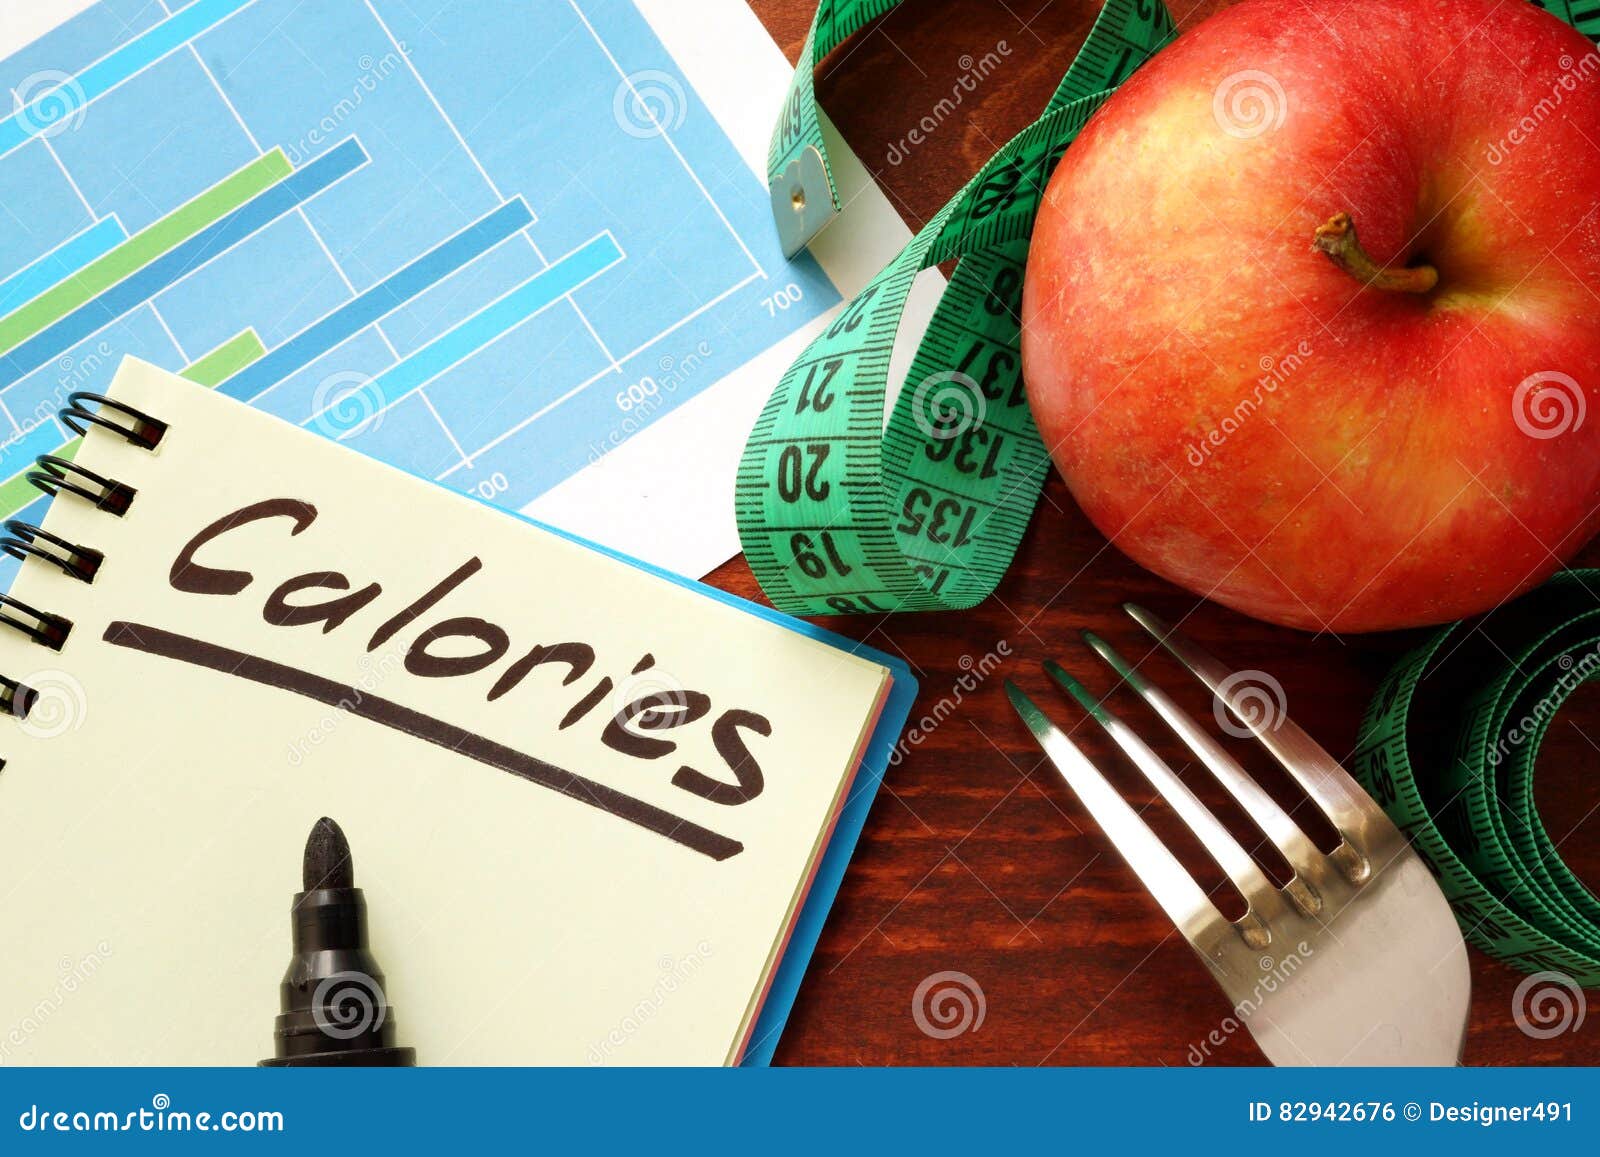 calories written in a diary.